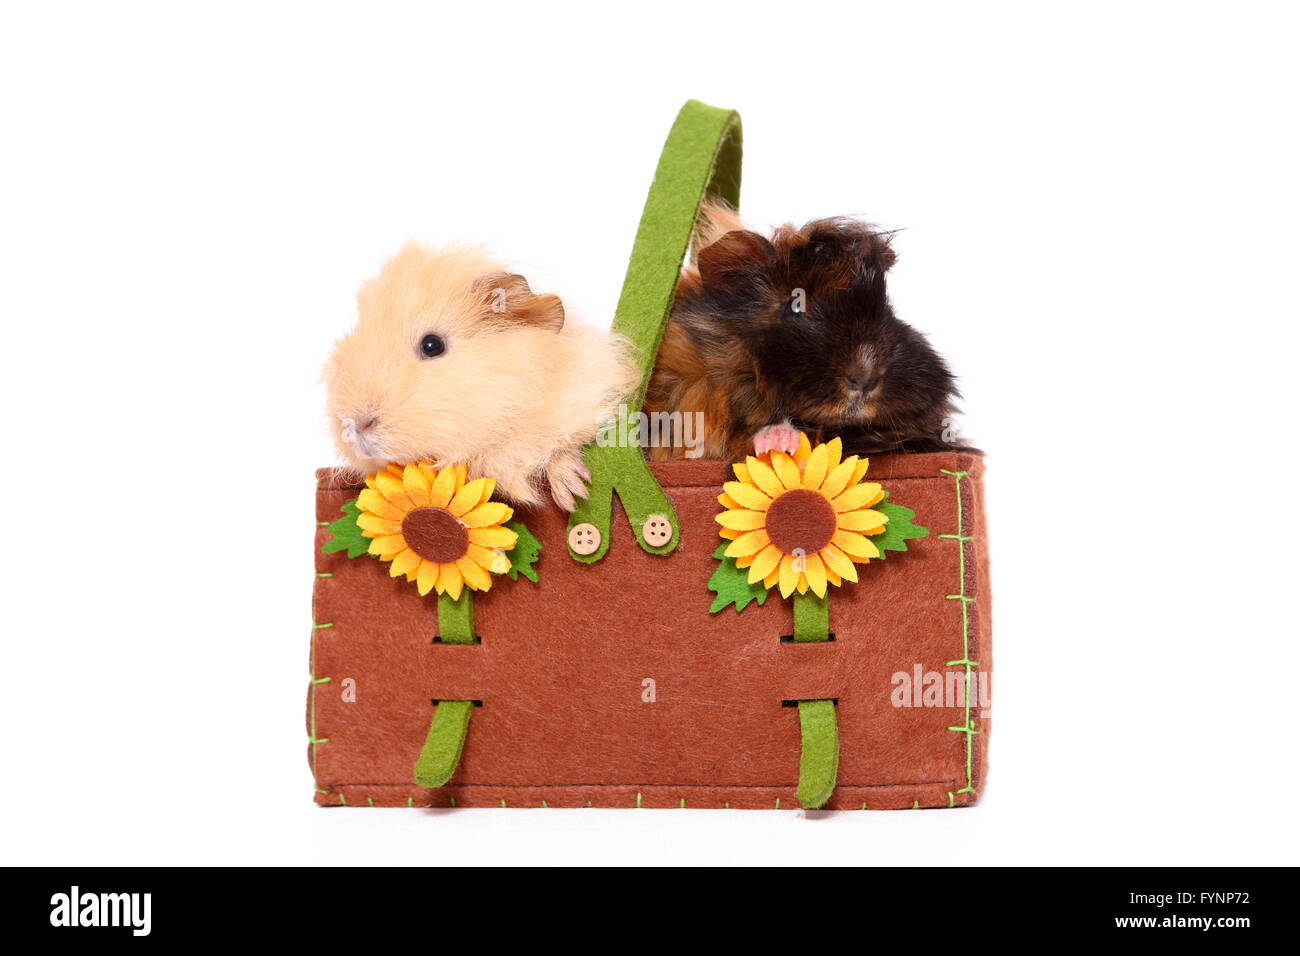 Long-haired Guinea Pig and Teddy Guinea Pig. Two adults in a felt bag with sunflowers. Studio picture against a white background. Germany Stock Photo